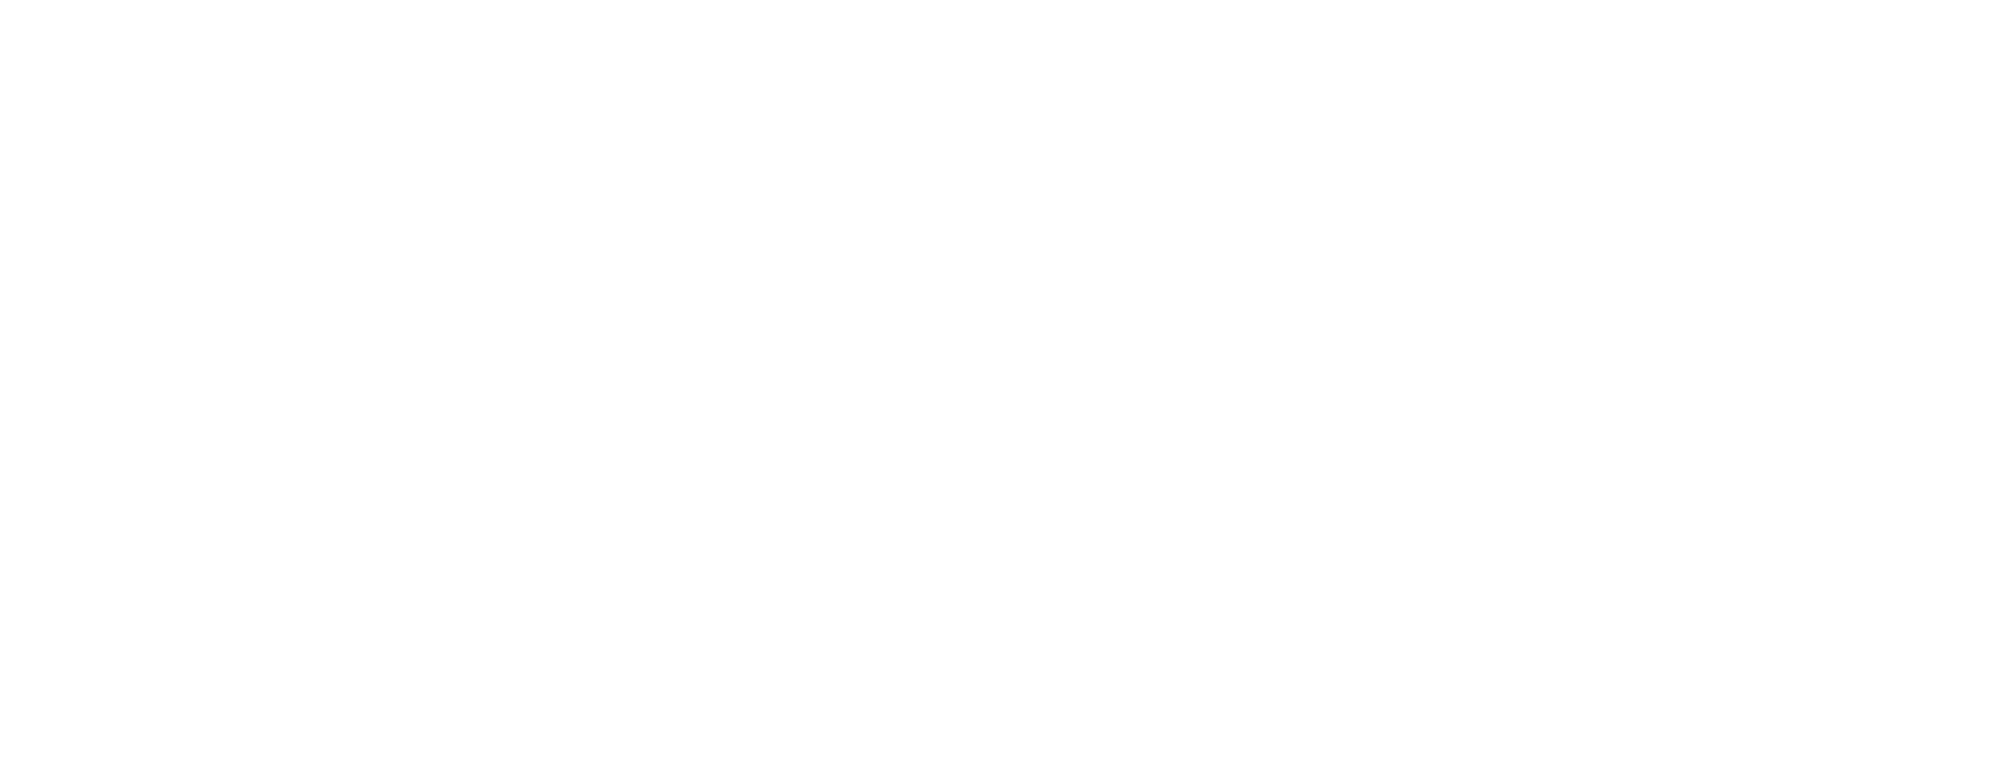 OpenFF Toolkit 0.10.3+0.g757813d1.dirty documentation logo